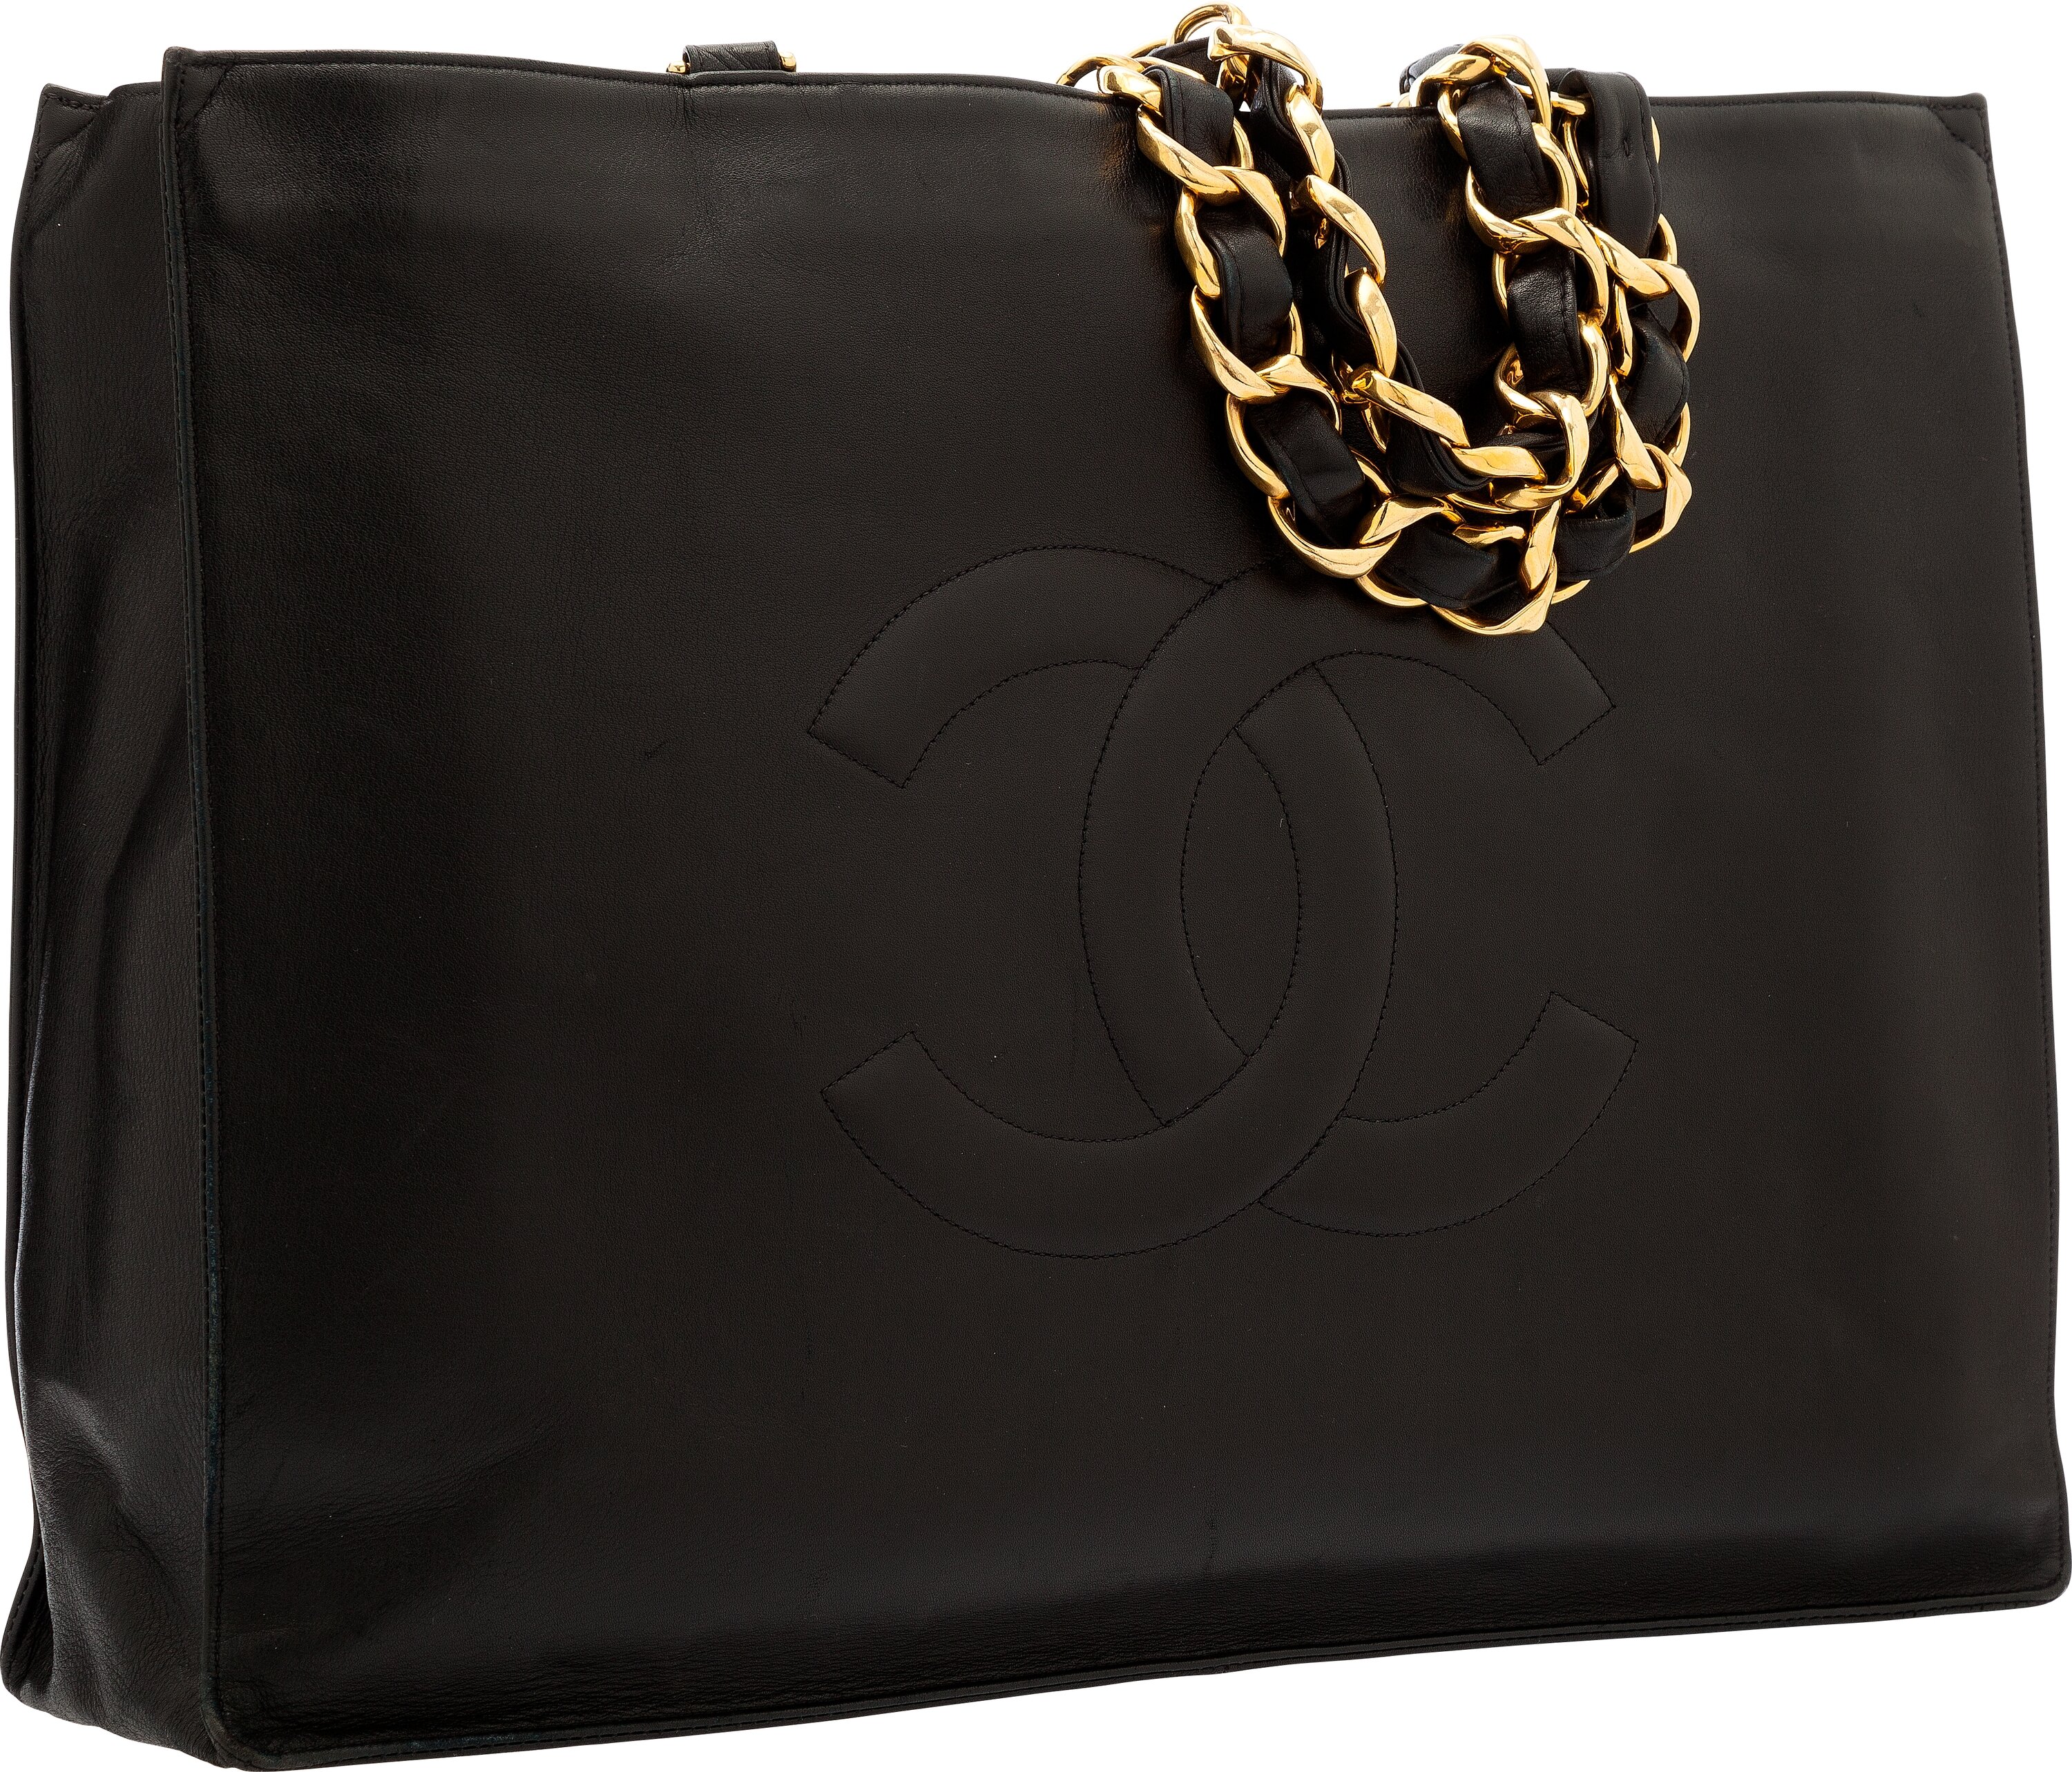 Chanel Black Lambskin Leather Large Tote Bag with Gold Hardware., Lot  #19024